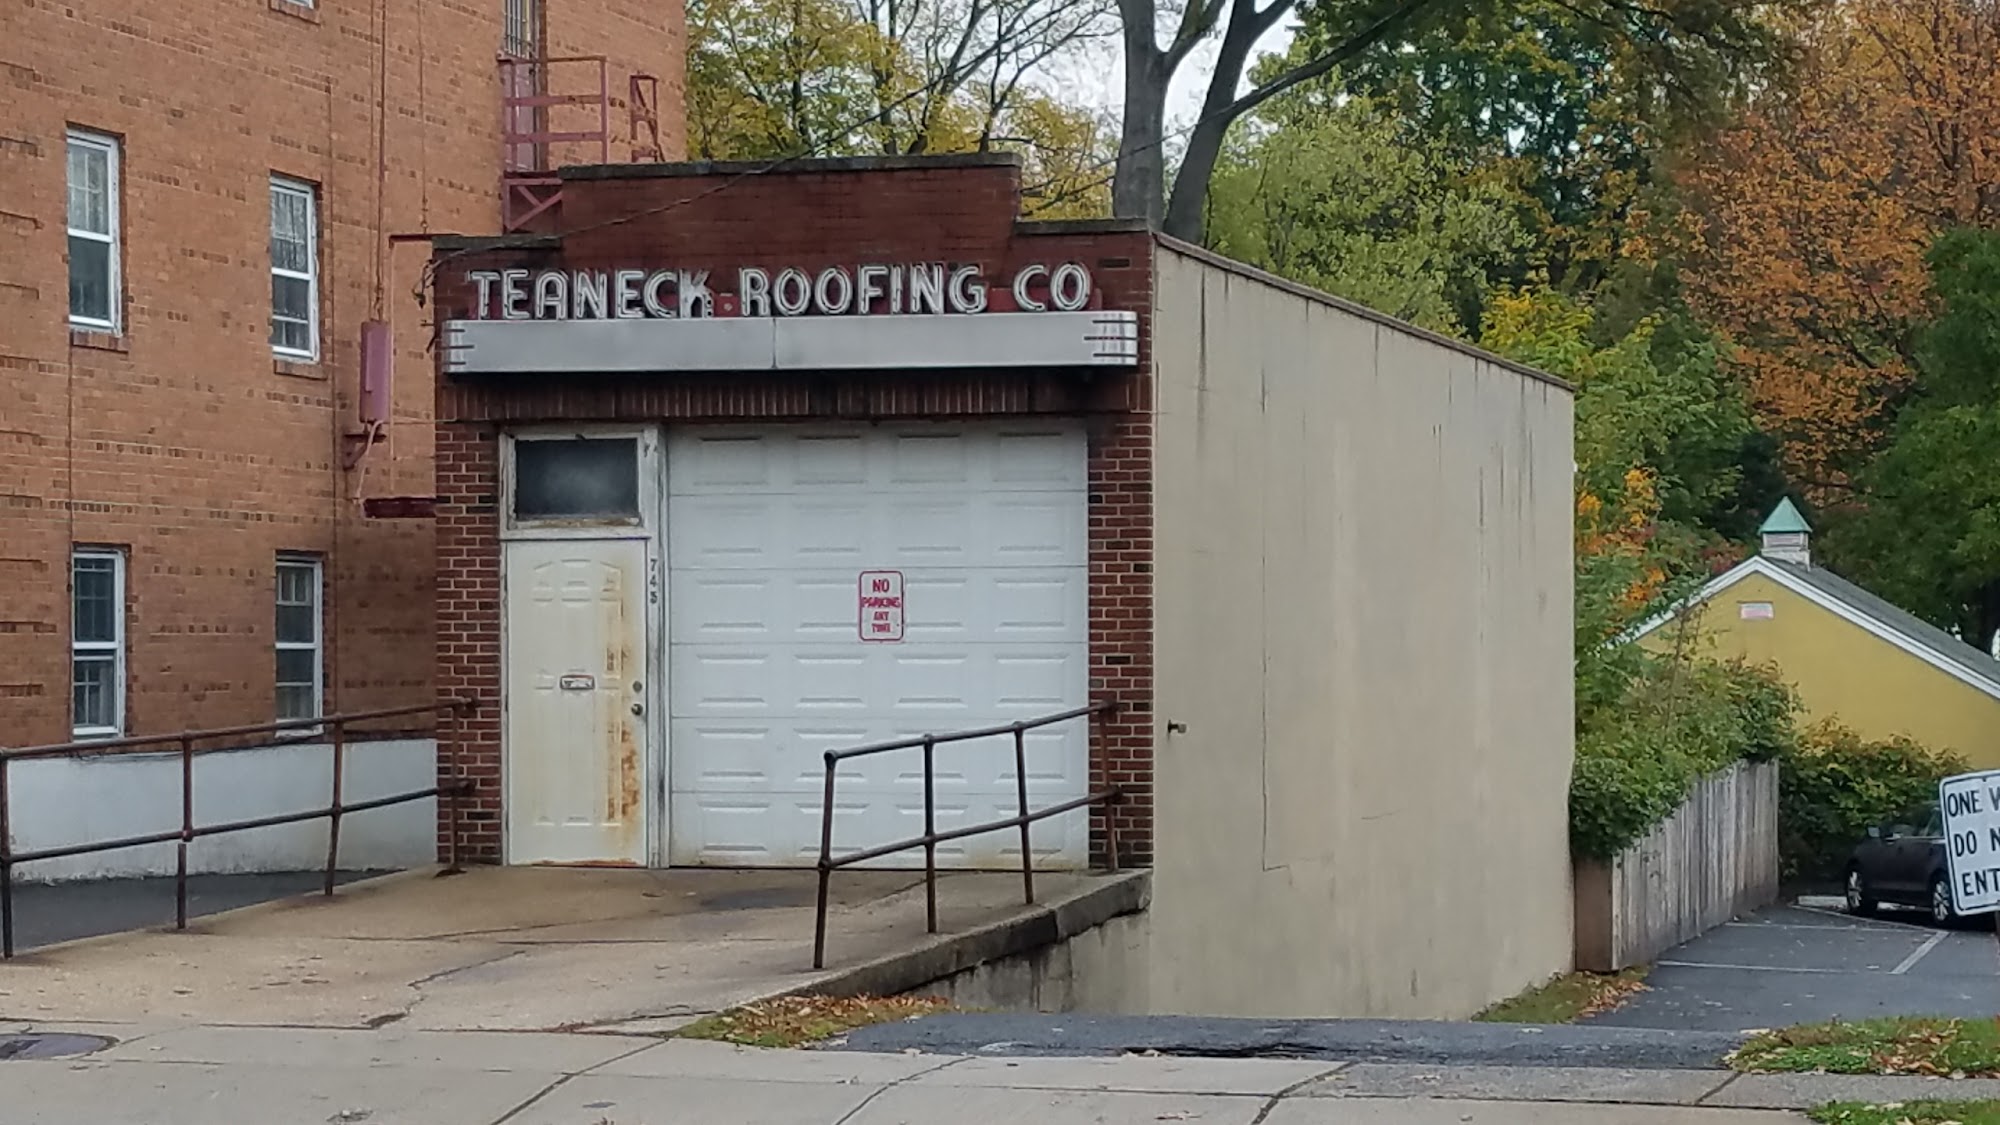 Teaneck Roofing Co LLC